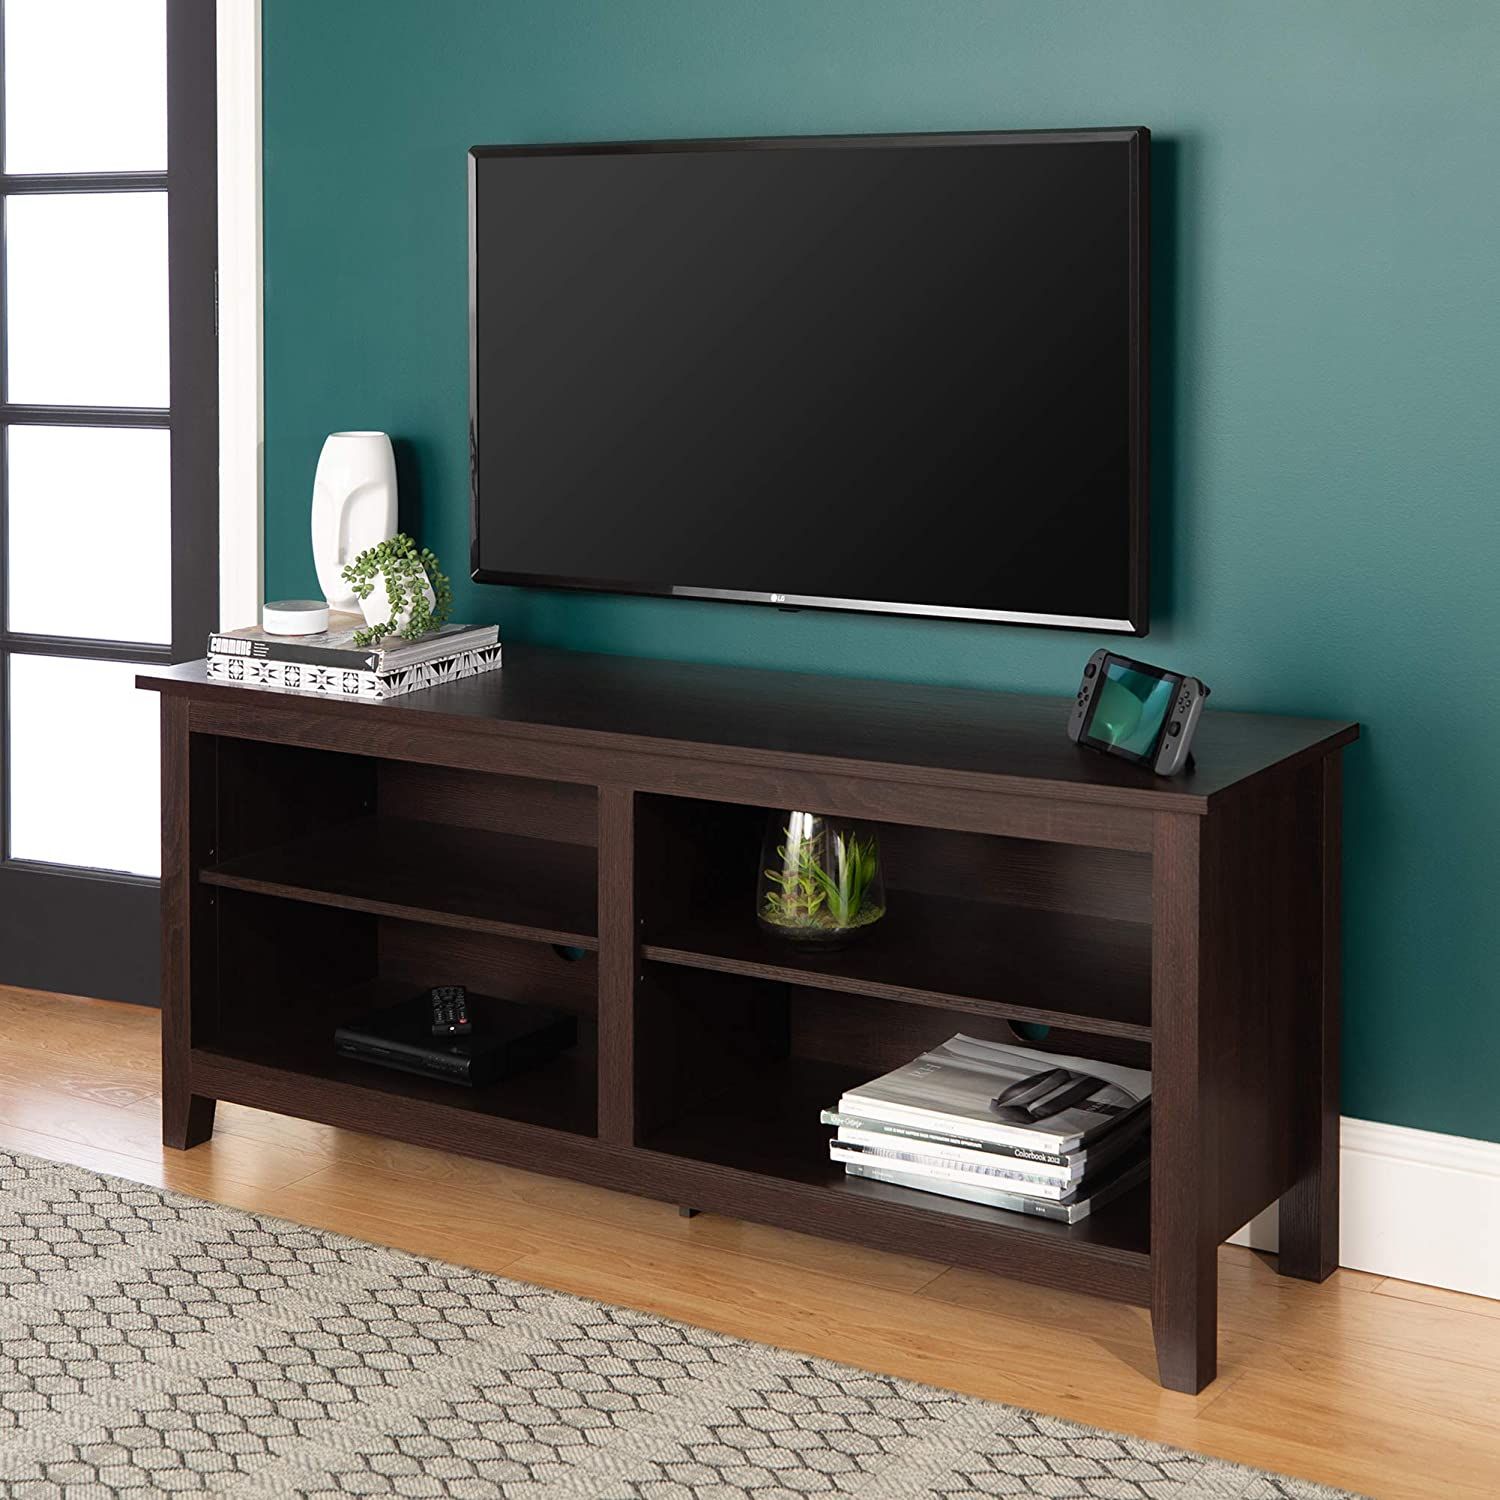 Sekey Home Entertainment Center Wood Media Tv Stand, 58 Inch Throughout Harveys Wooden Tv Stands (View 11 of 15)